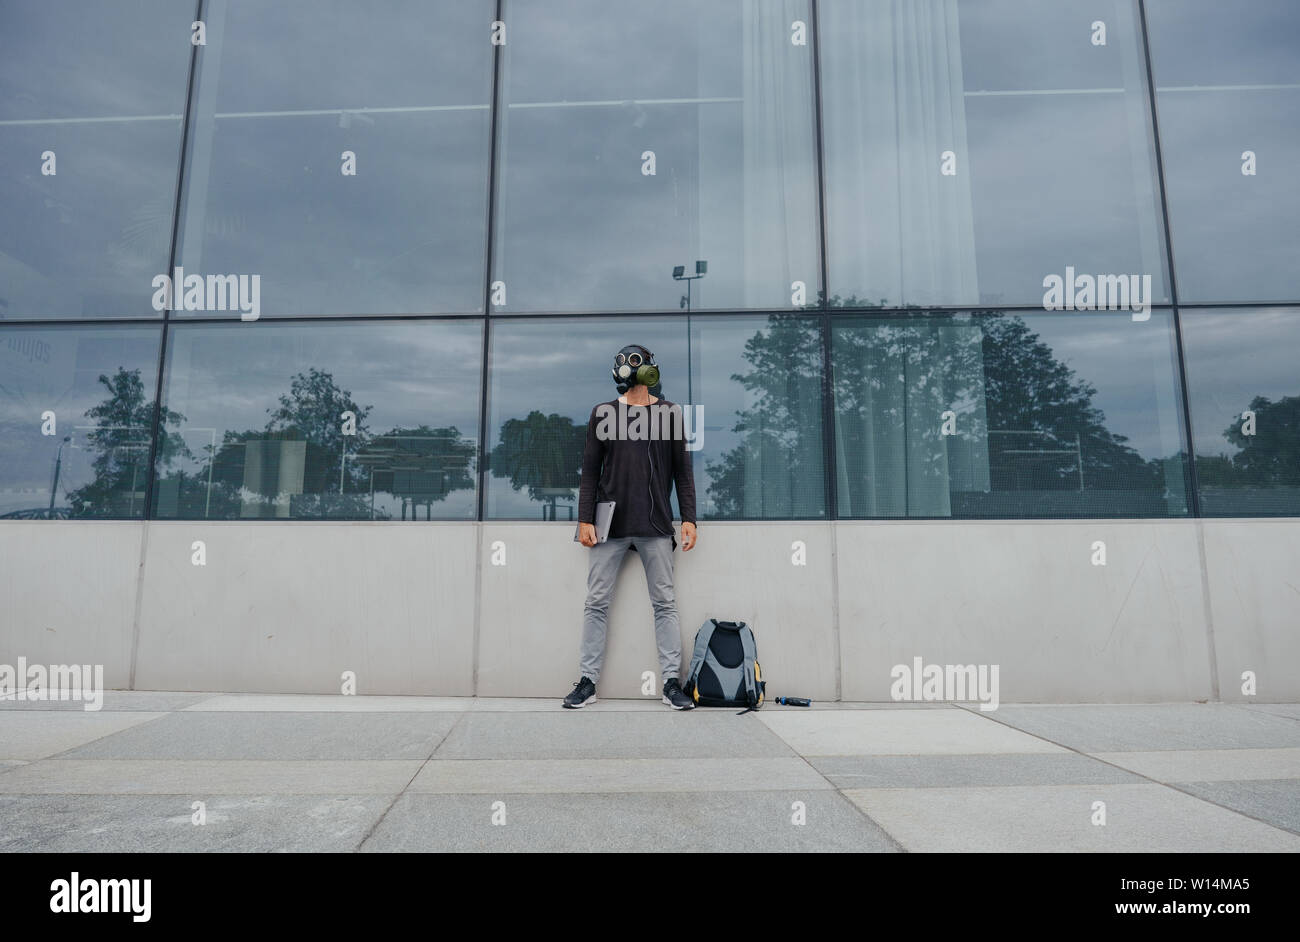 A city man in a gas mask works and listens to music against the background of a building and trees in a vacuum without people Stock Photo